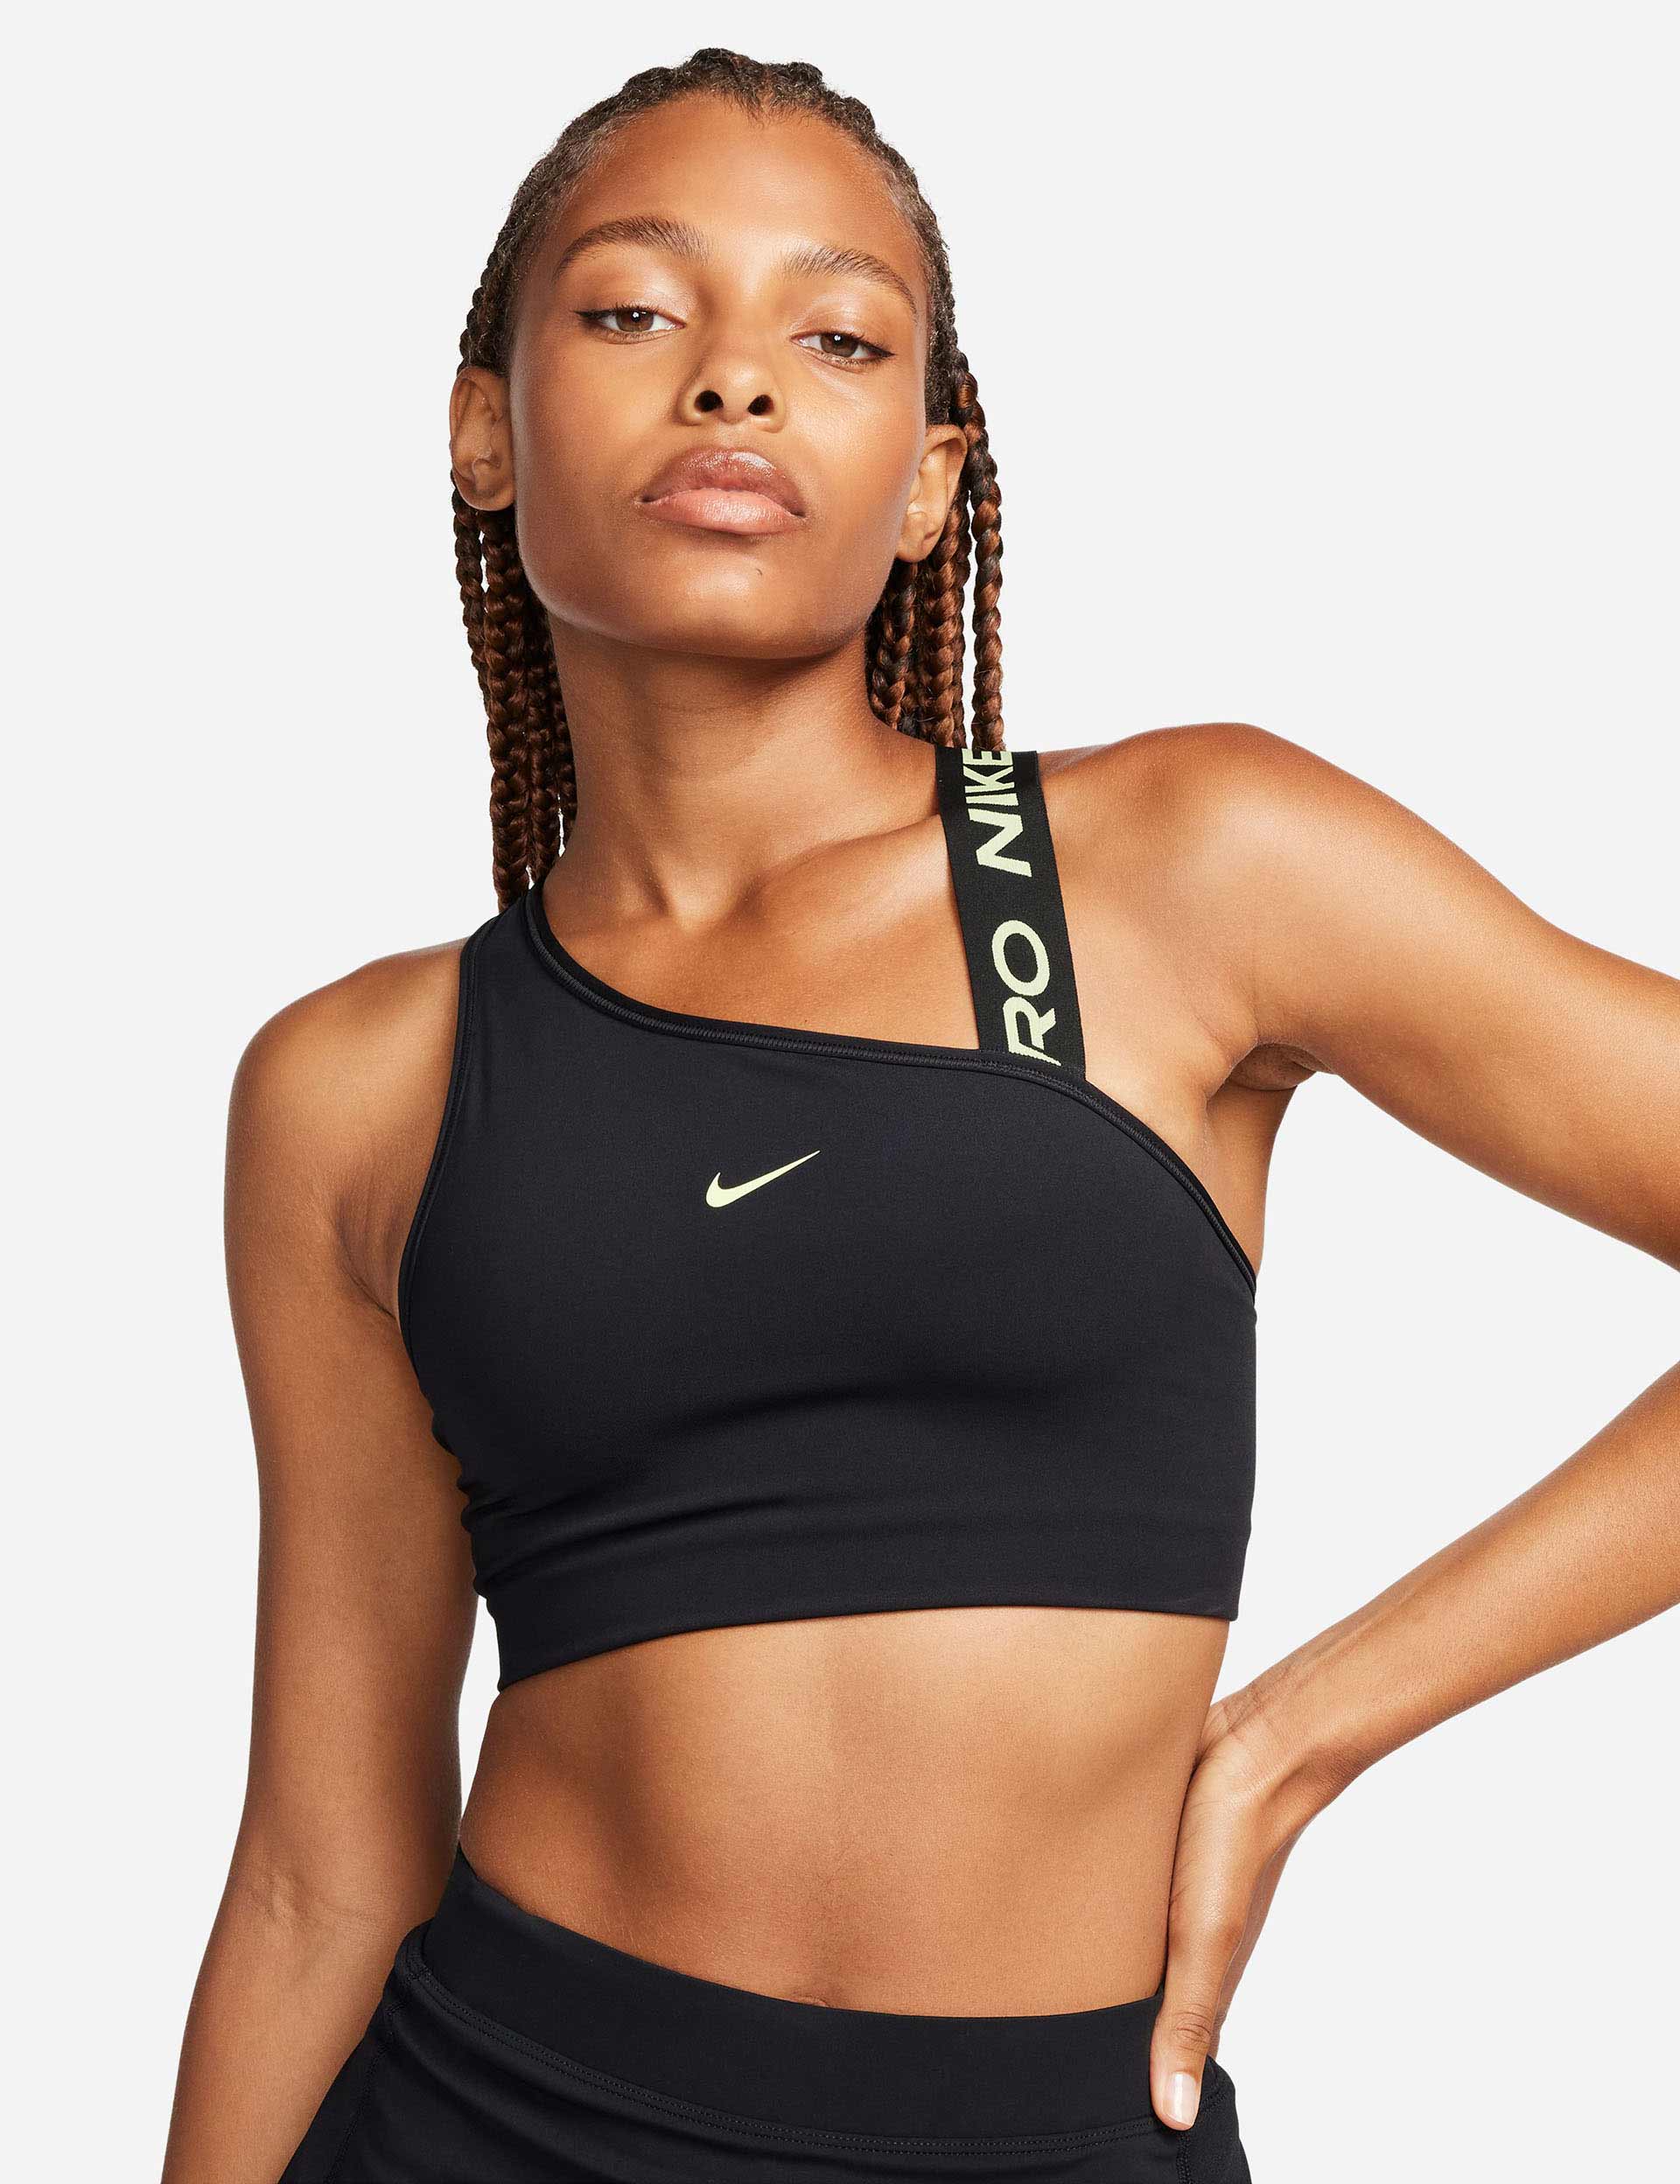 Nike Pro Bra, Shop The Largest Collection